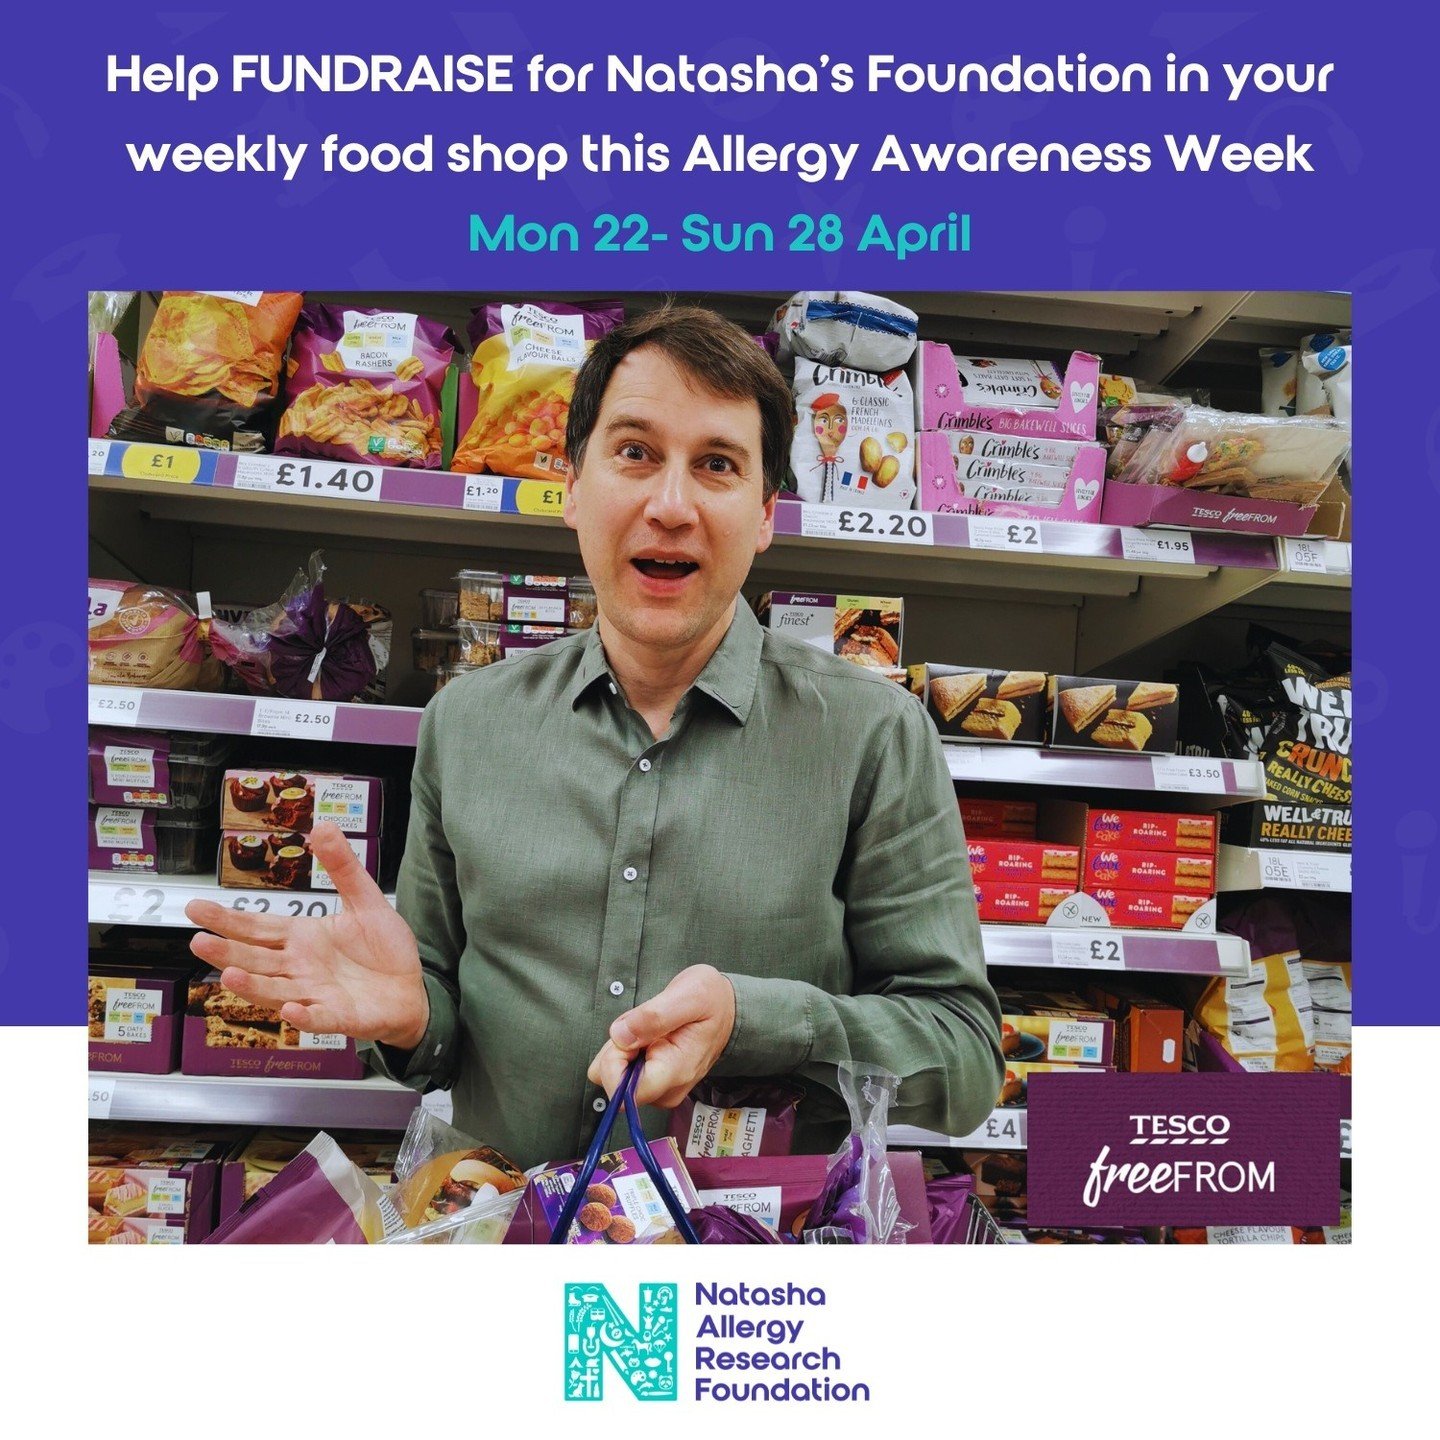 We&rsquo;re incredibly grateful to be working with @Tescofood for Allergy Awareness Week for the 5th year running! Tesco are pledging to donate 10p to Natasha&rsquo;s Foundation from every sale, both in-store and online across their own brand Tesco F